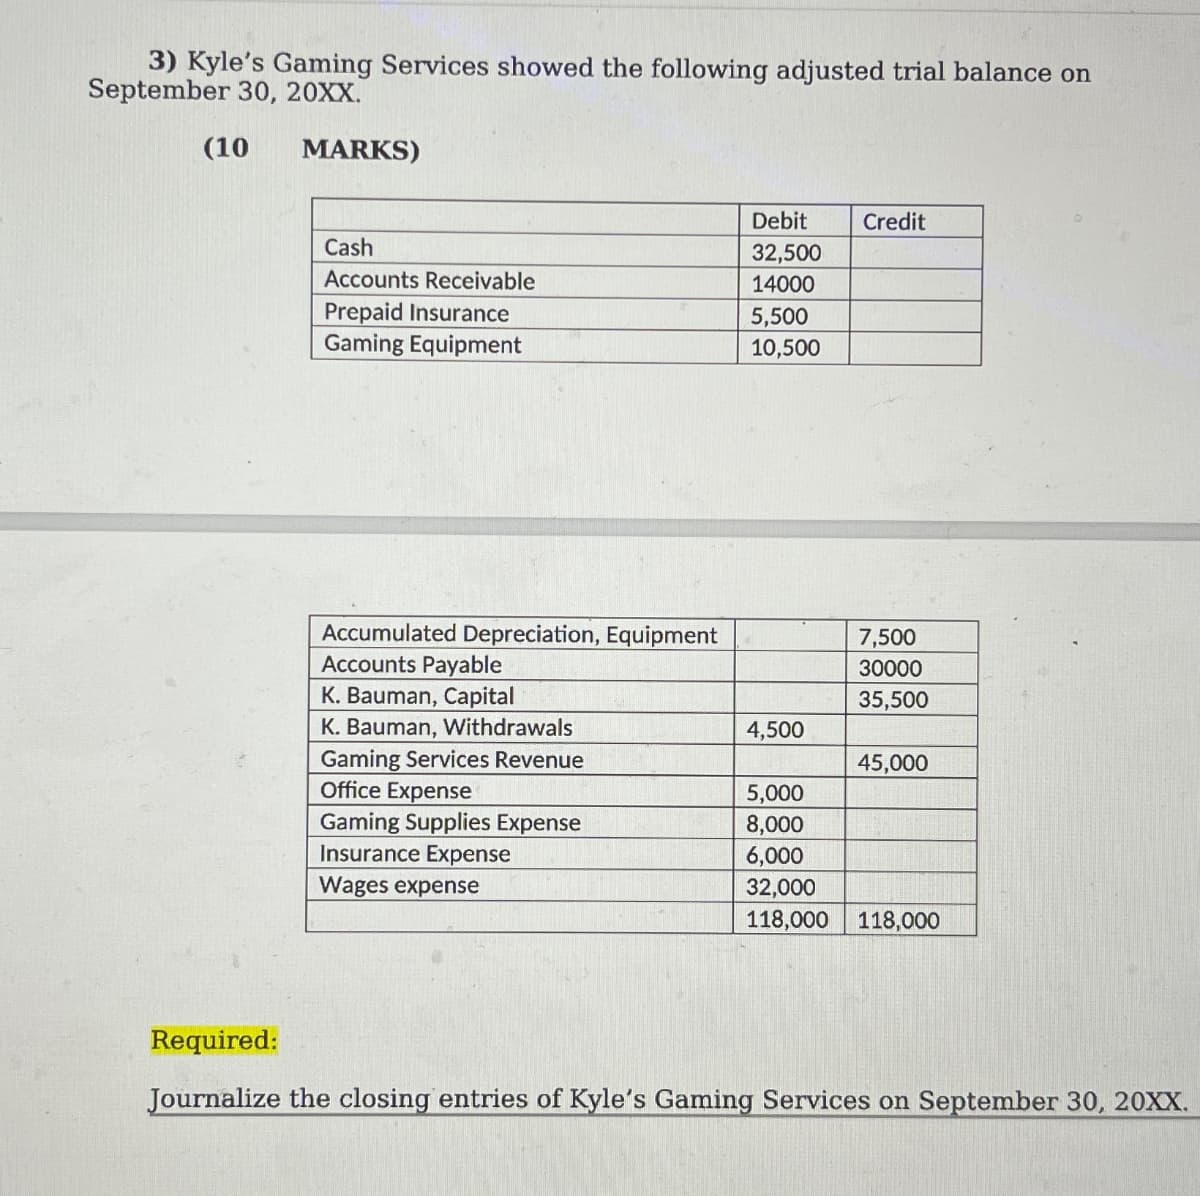 3) Kyle's Gaming Services showed the following adjusted trial balance on
September 30, 20XX.
(10
MARKS)
Debit
Credit
Cash
32,500
Accounts Receivable
14000
Prepaid Insurance
5,500
Gaming Equipment
10,500
Accumulated Depreciation, Equipment
7,500
Accounts Payable
30000
K. Bauman, Capital
35,500
K. Bauman, Withdrawals
4,500
Gaming Services Revenue
45,000
Office Expense
5,000
Gaming Supplies Expense
8,000
Insurance Expense
6,000
Wages expense
32,000
118,000
118,000
Required:
Journalize the closing entries of Kyle's Gaming Services on September 30, 20XX.